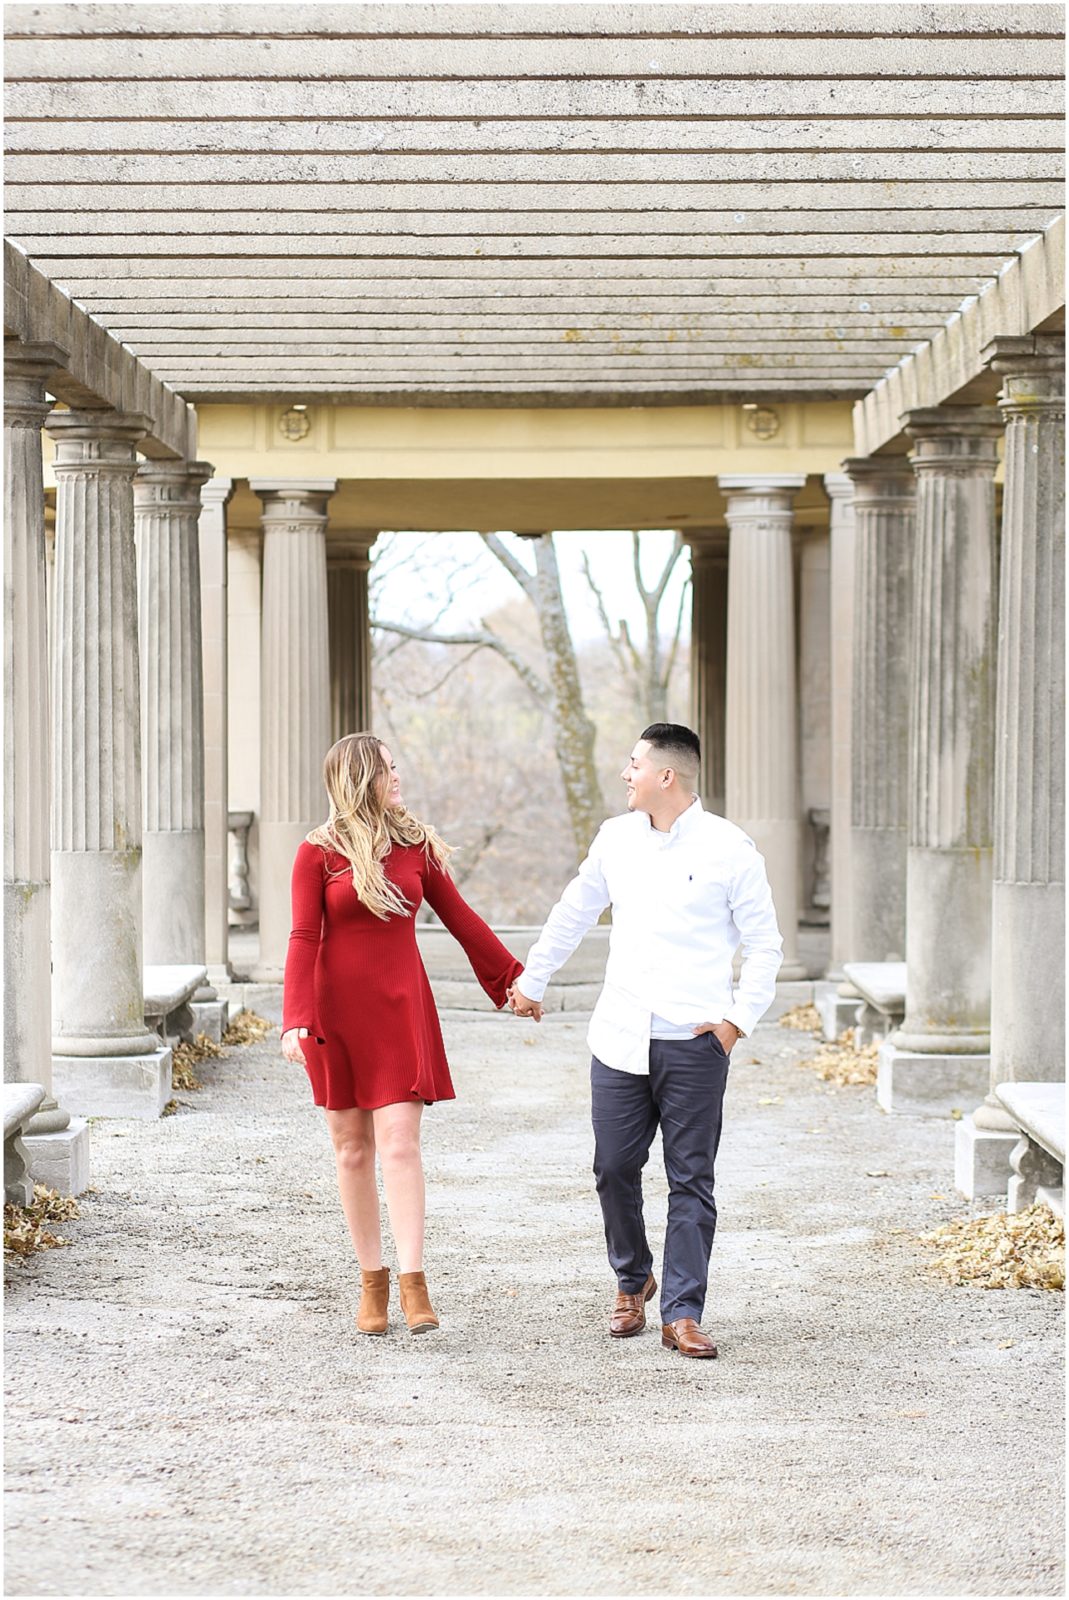 CUTE COUPLE WALKING AT COLONNADE IN KANSAS CITY - KANSAS CITY WEST BOTTOMS ENGAGEMENT PORTRAITS WITH MARIAM SAIFAN PHOTOGRAPHY - BEST WEDDING PHOTOGRAPHER IN KC - KANSAS CITY PORTRAIT AND WEDDING PHOTOGRAPHER - WEDDING AT BARN AT RIVERBEND